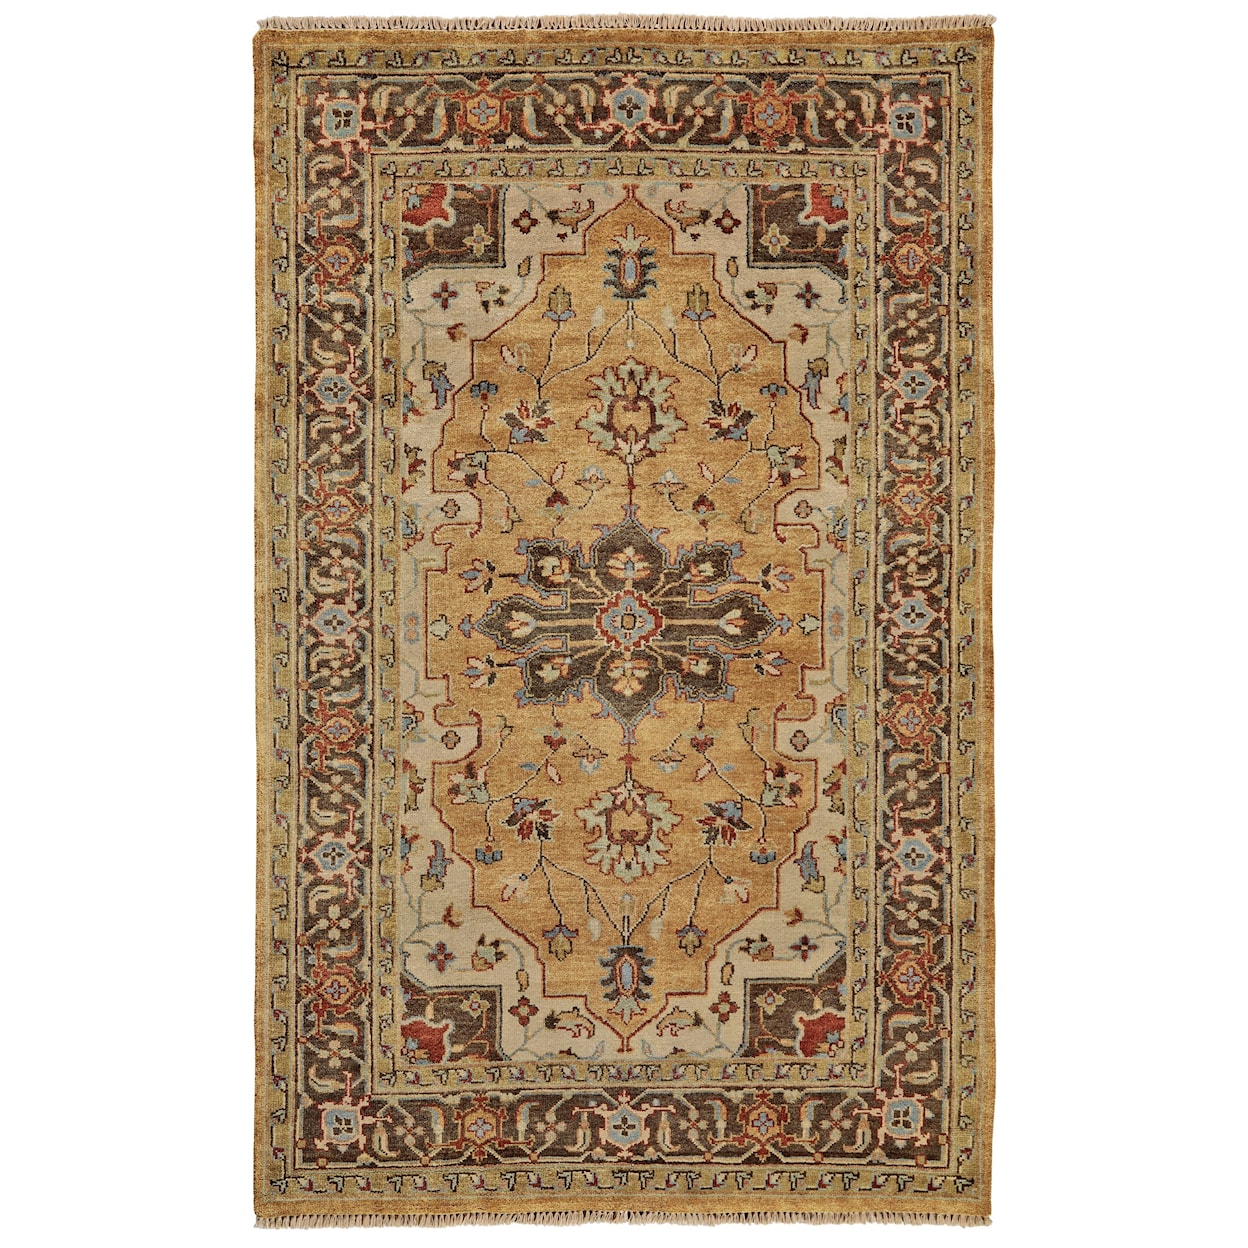 Feizy Rugs Ustad Gold/Brown 2' x 3' Area Rug